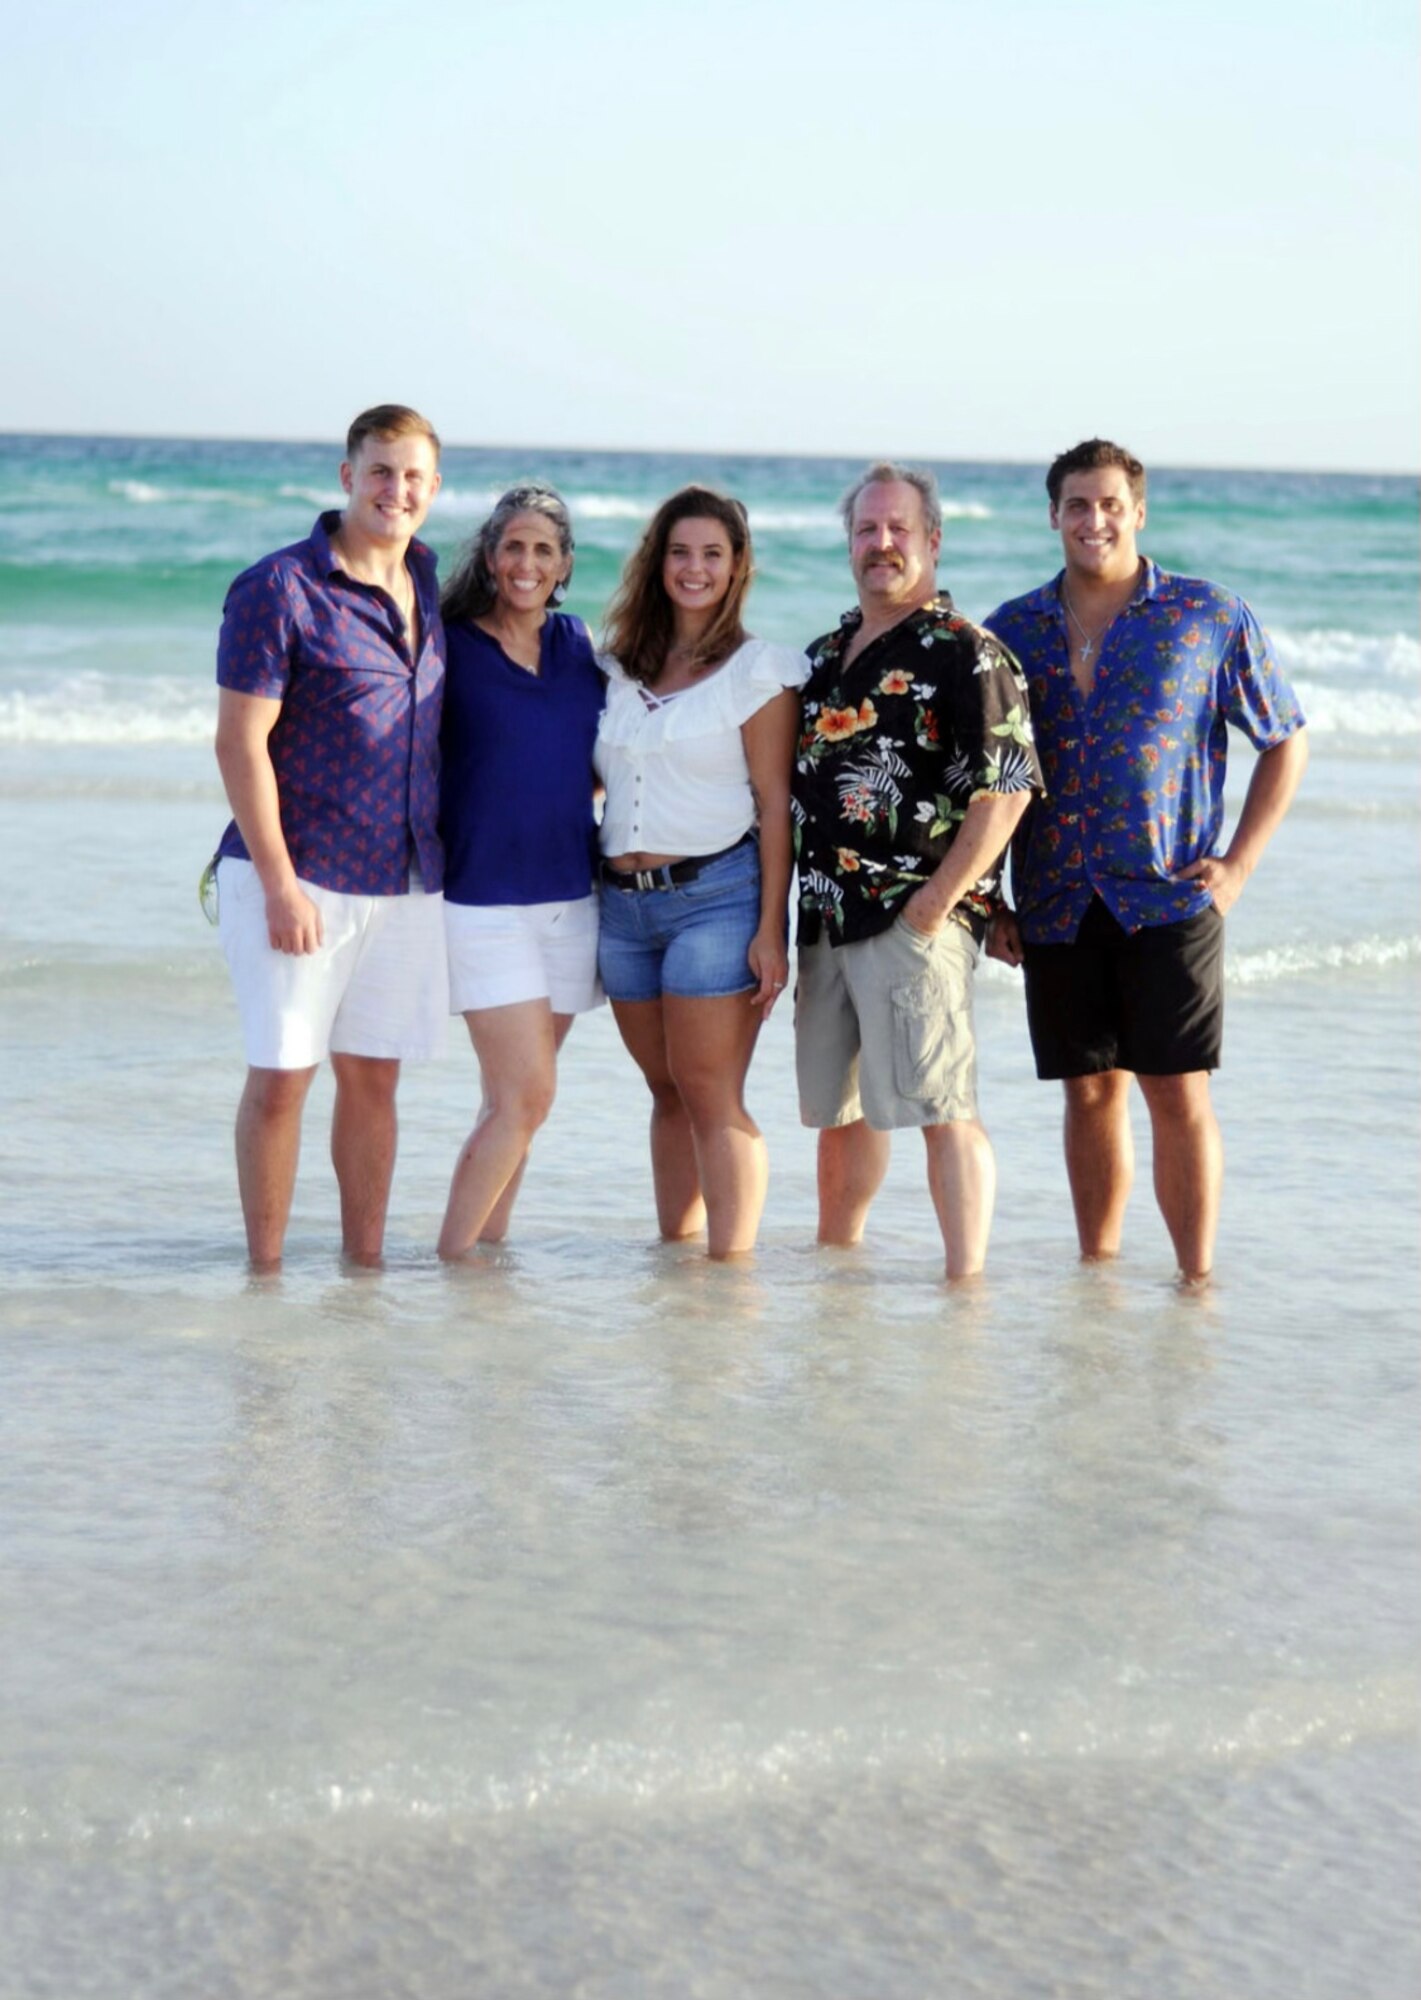 From the left to right: Vincent, Brenda, Claire, Andrew and Benjamin Miazga pose for a family portrait in Destin, Florida. U.S. Air Force Lt. Col. Brenda Miazga 17th Operational Medical Readiness Squadron commander and her family were stationed at Eglin Air Force Base. (Courtesy photo)